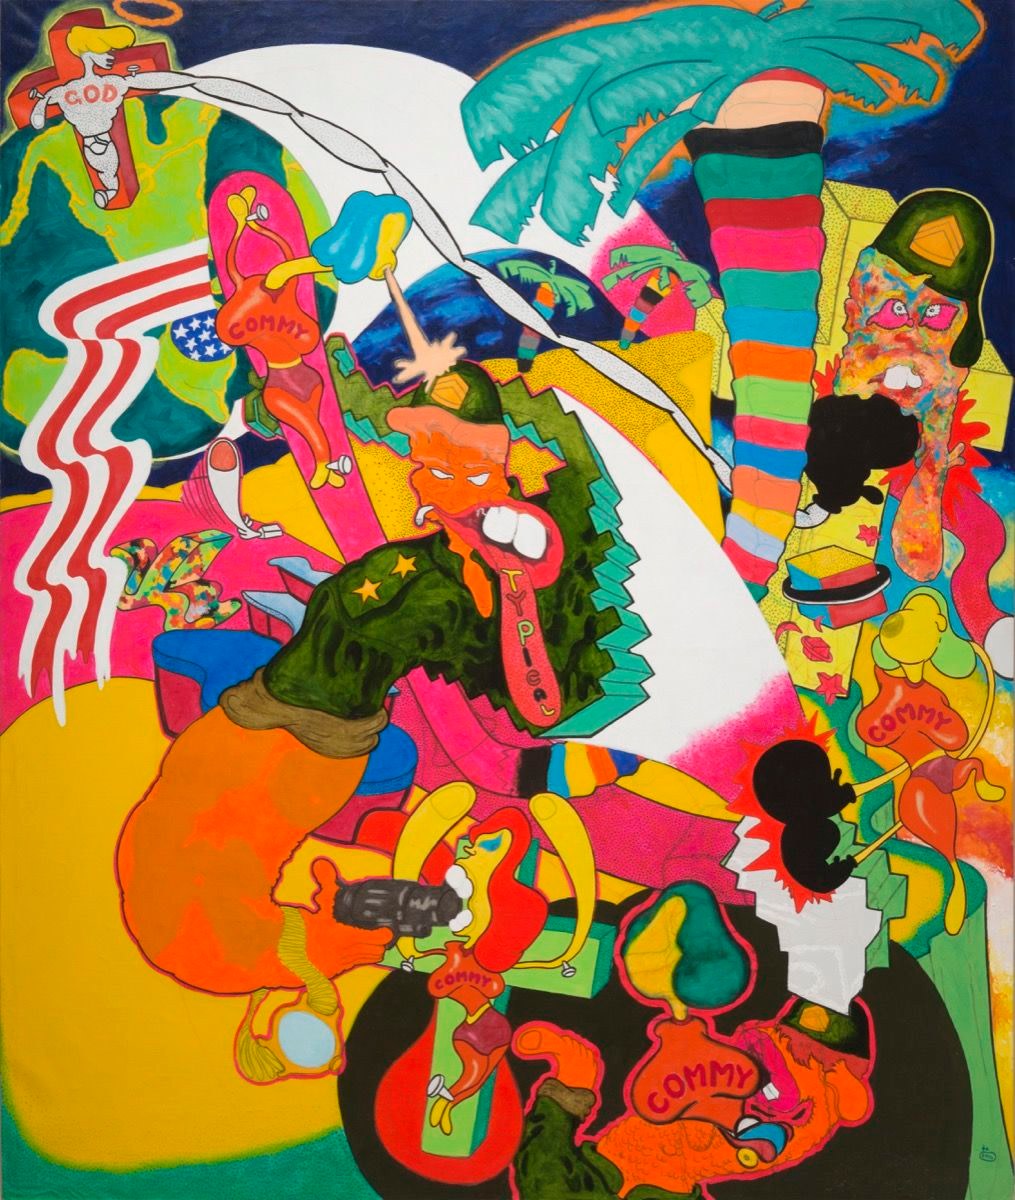 Peter Saul, &quot;Vietnam,&quot; 1966.&nbsp;Copyright Peter Saul. Courtesy of Mary Boone Gallery, New York.&nbsp;